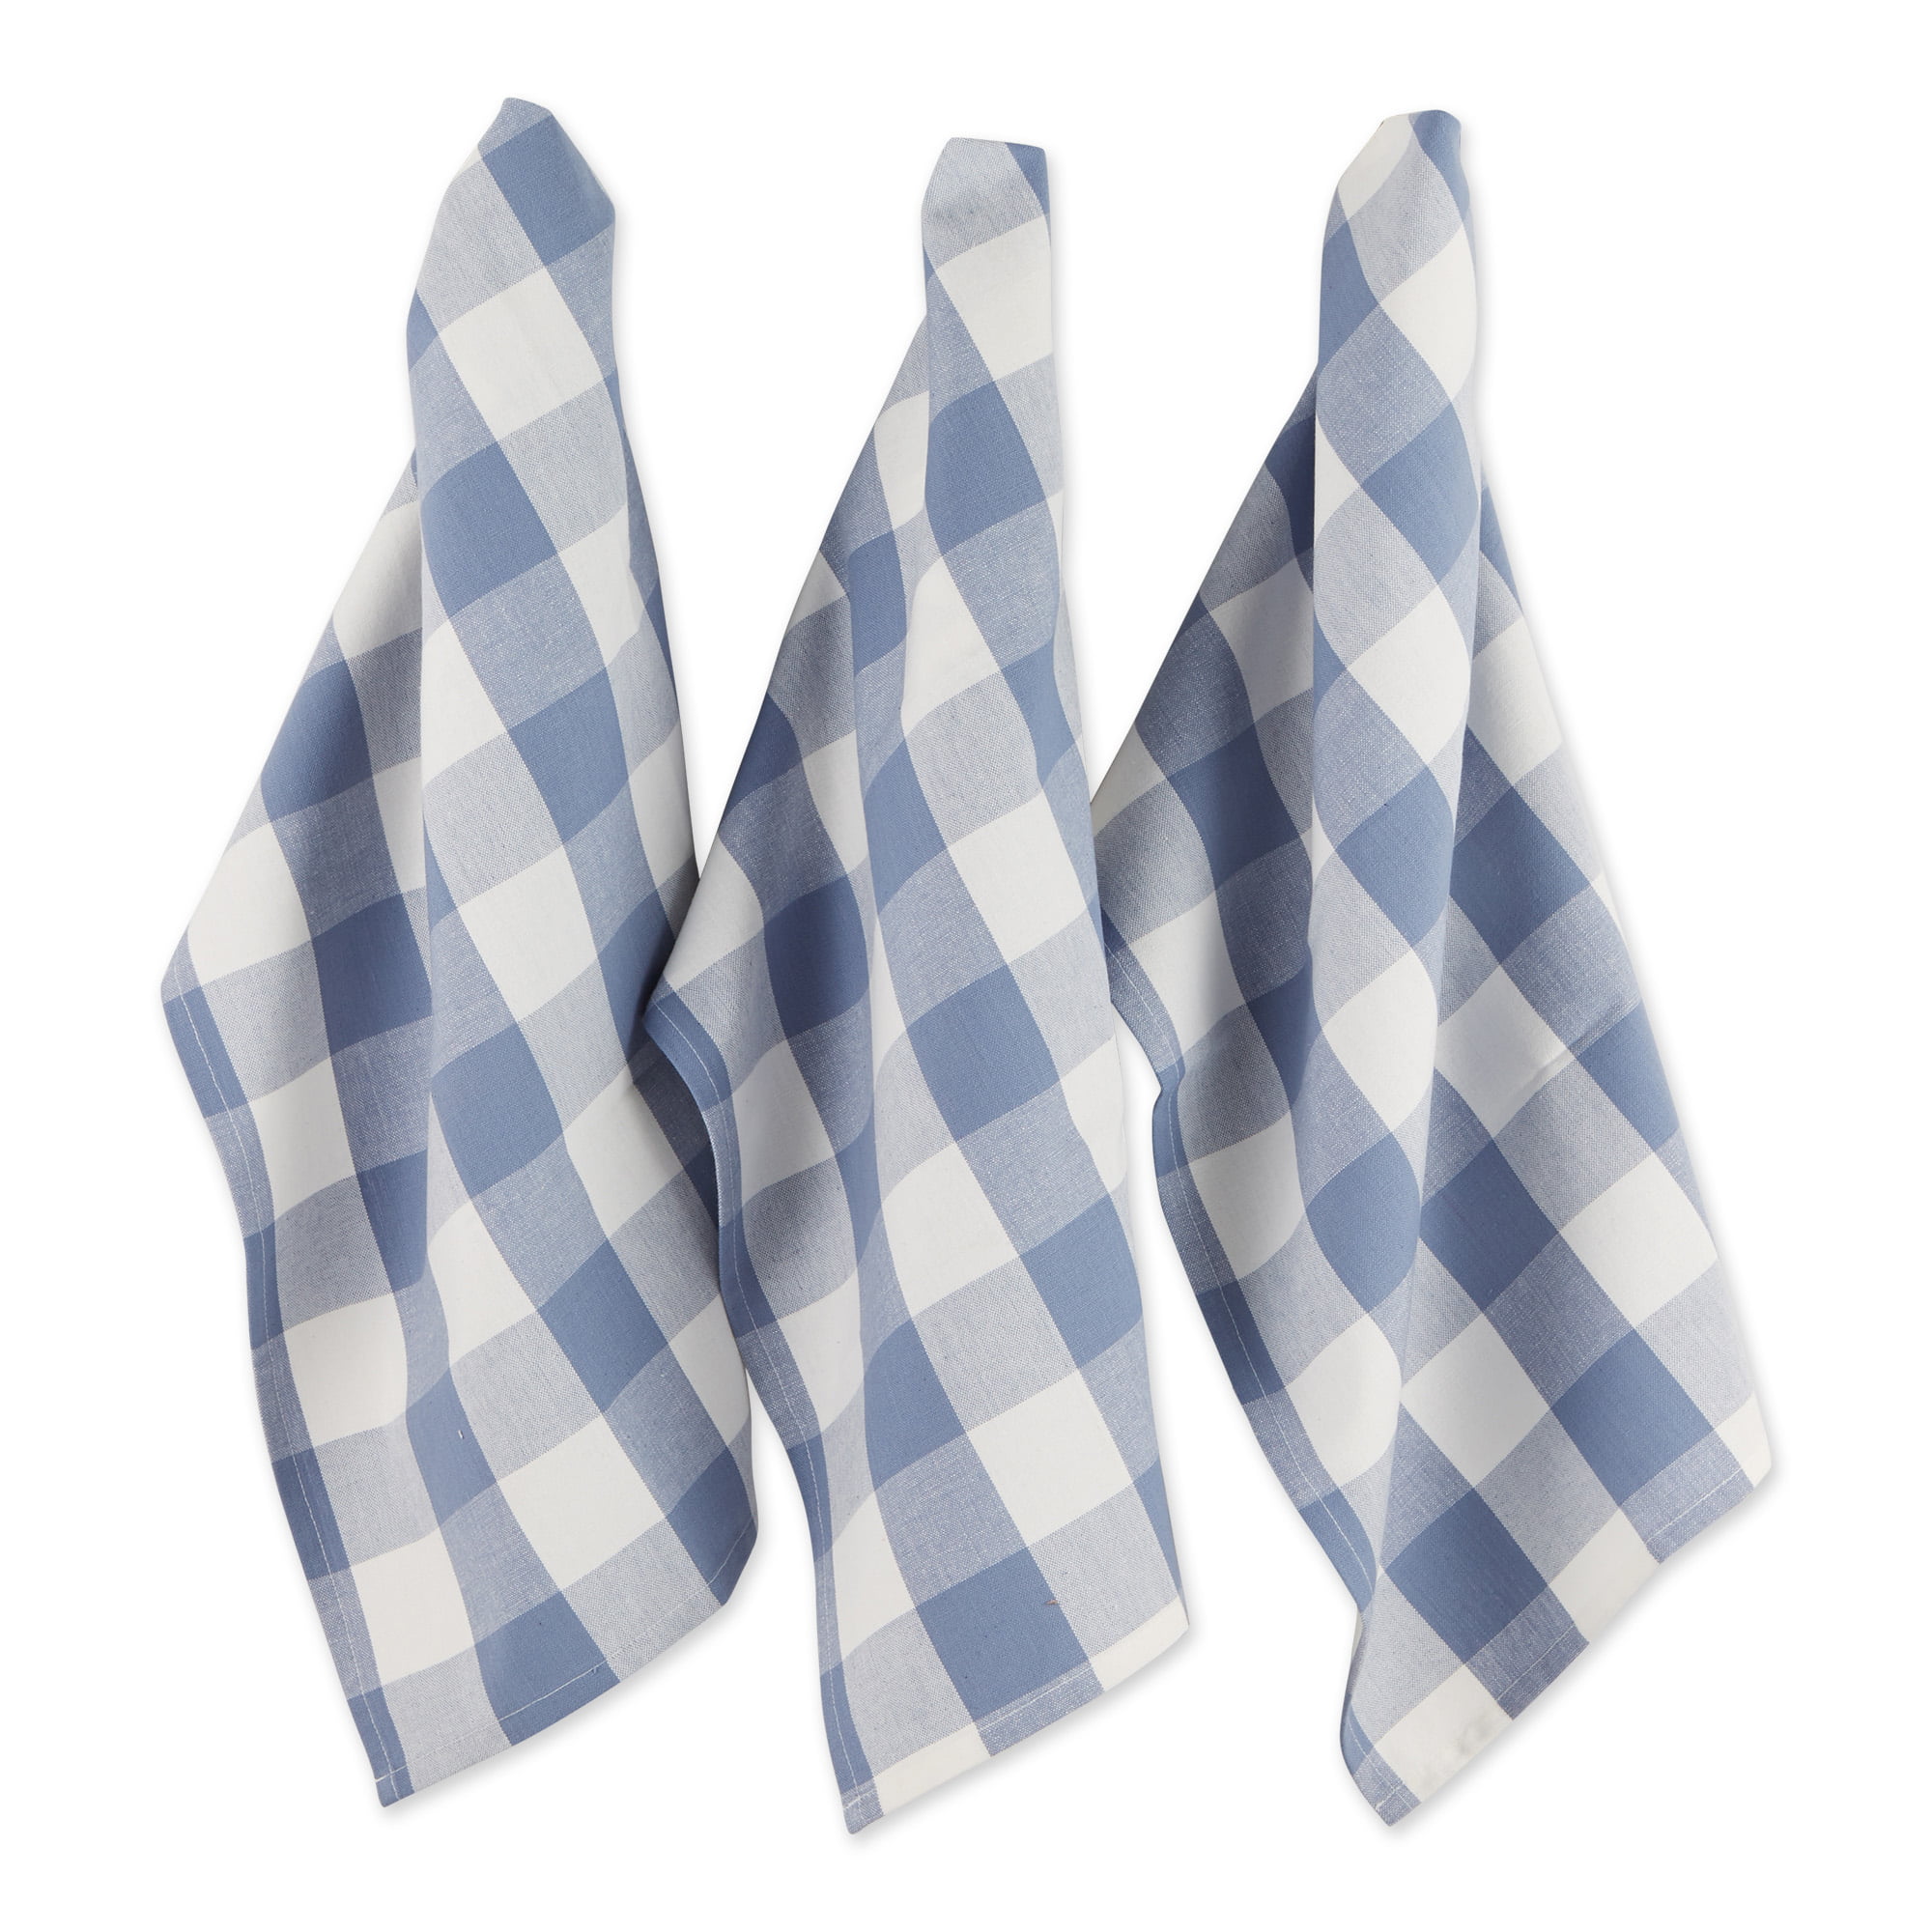 Design Imports BLUEBERRY PLAID Cotton Dish Towels Set of 2 Blue and White 